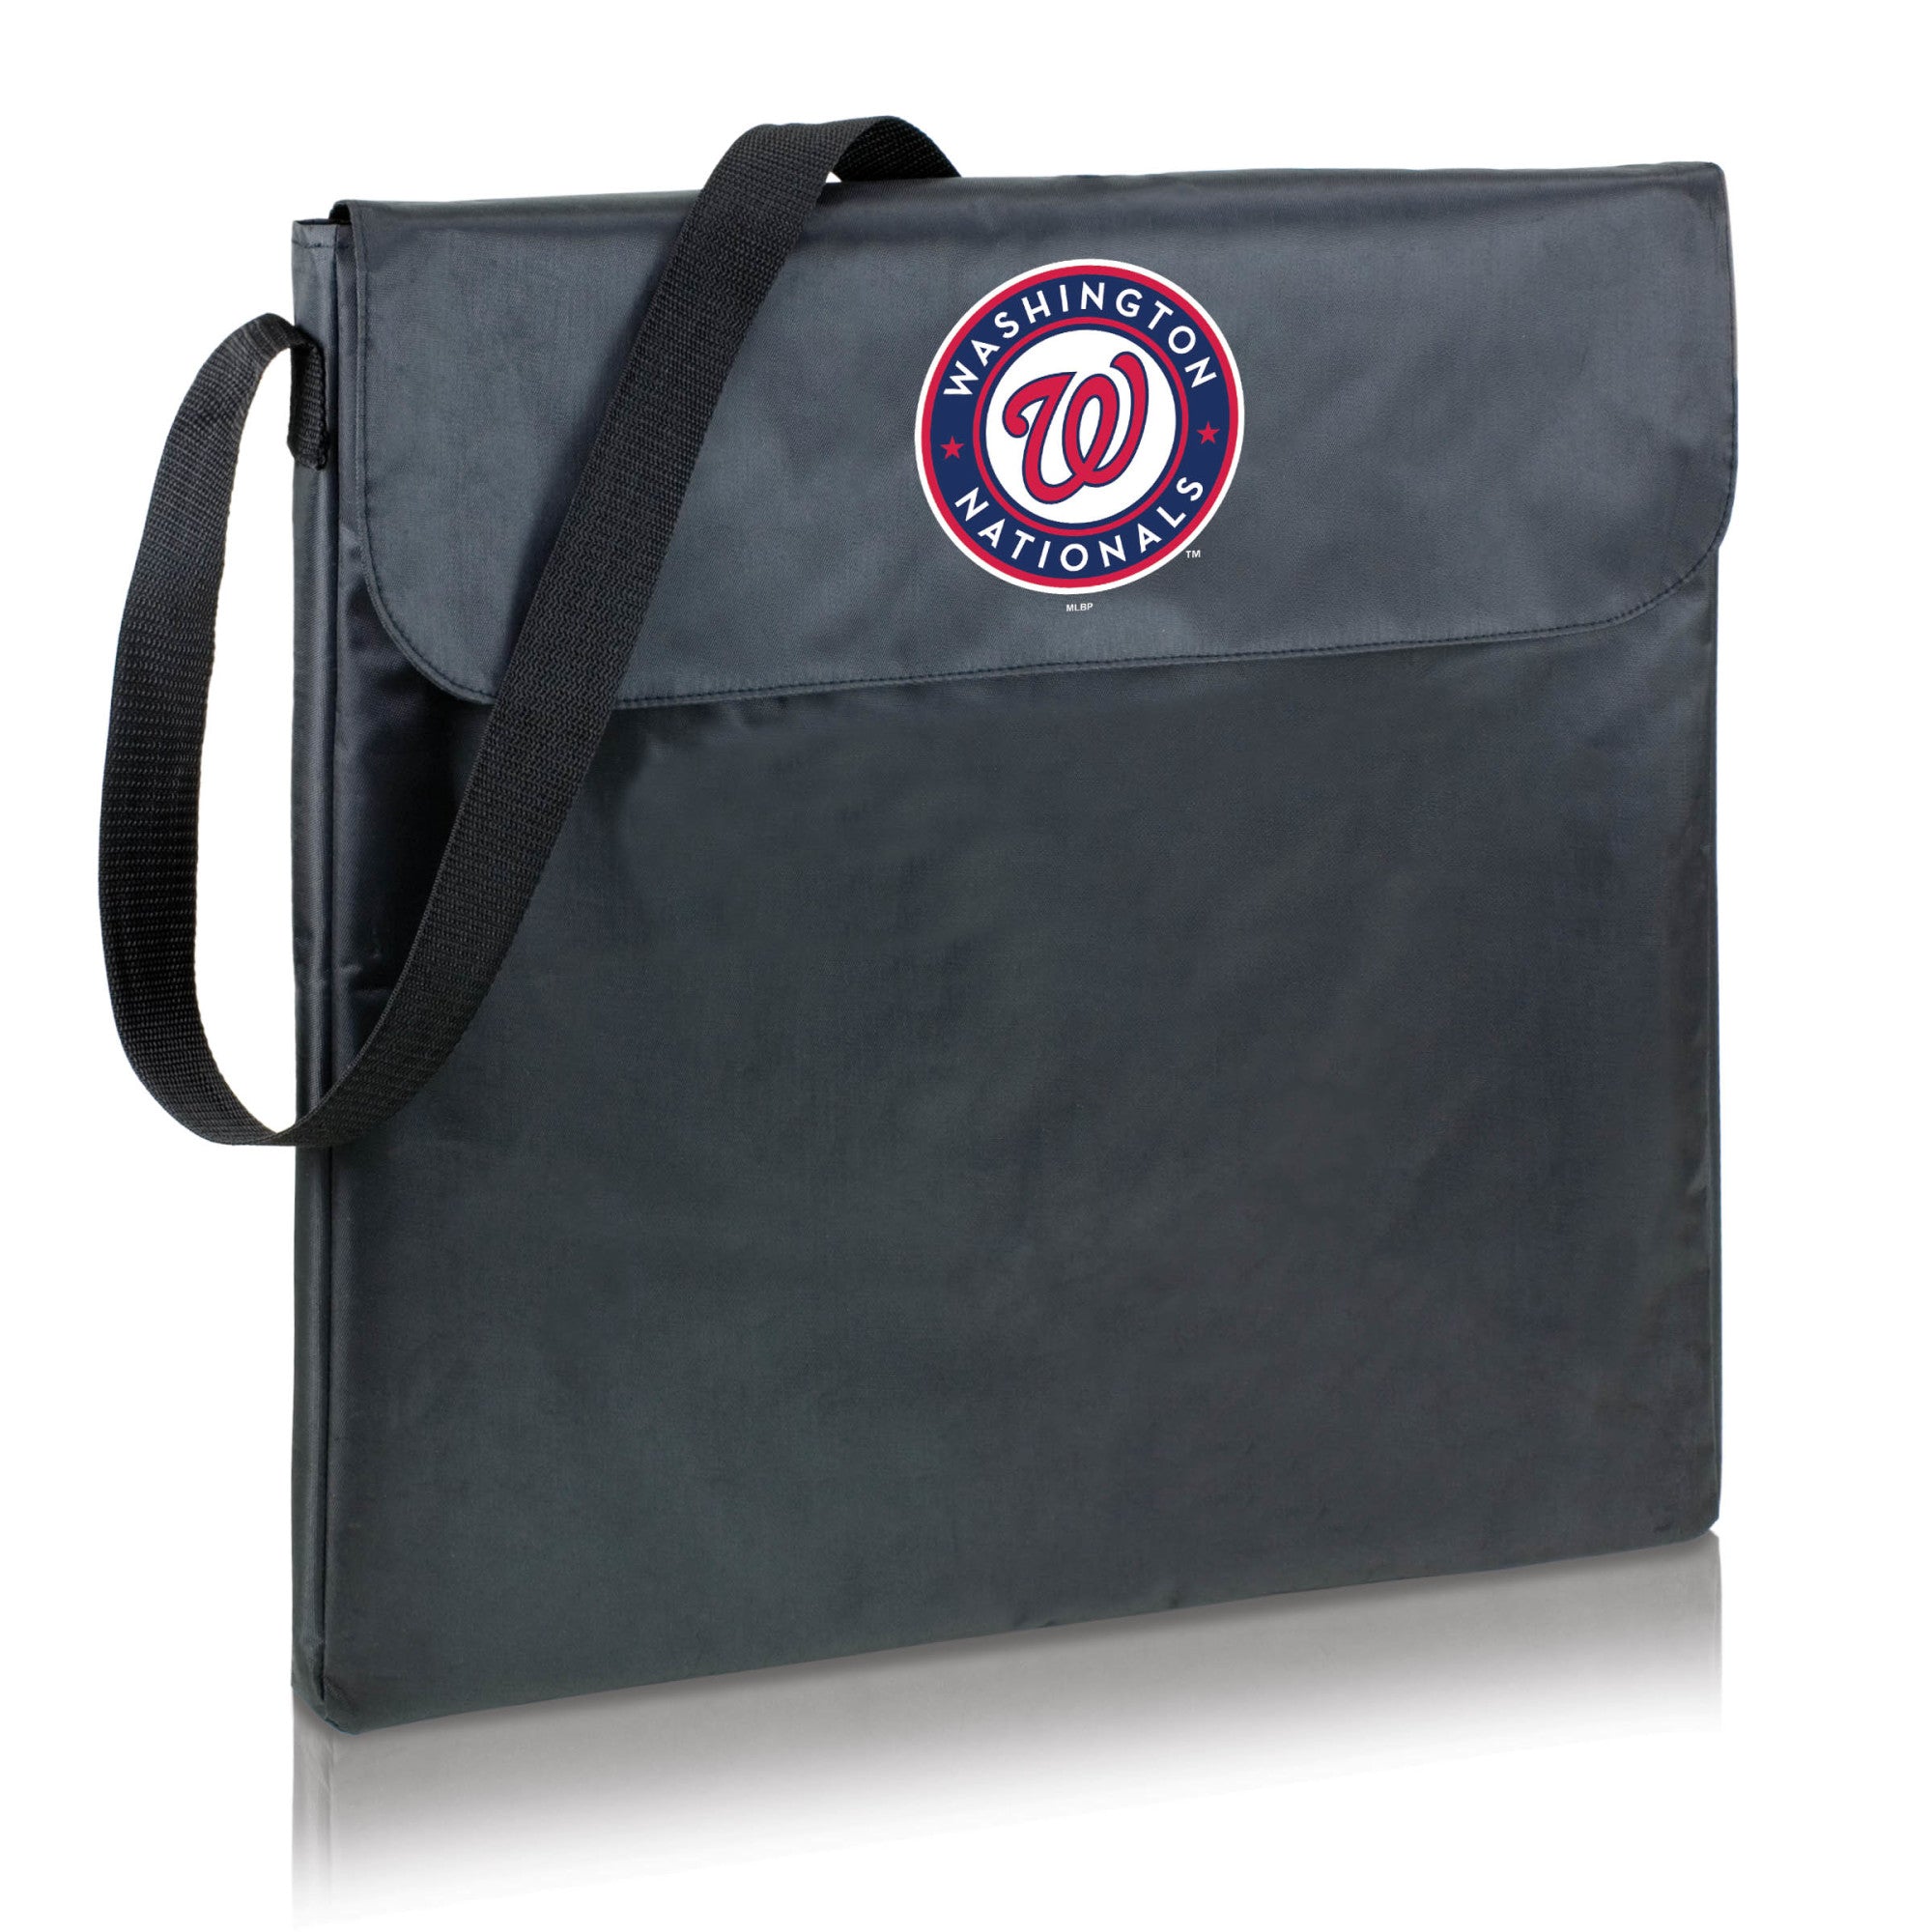 Washington Nationals - X-Grill Portable Charcoal BBQ Grill